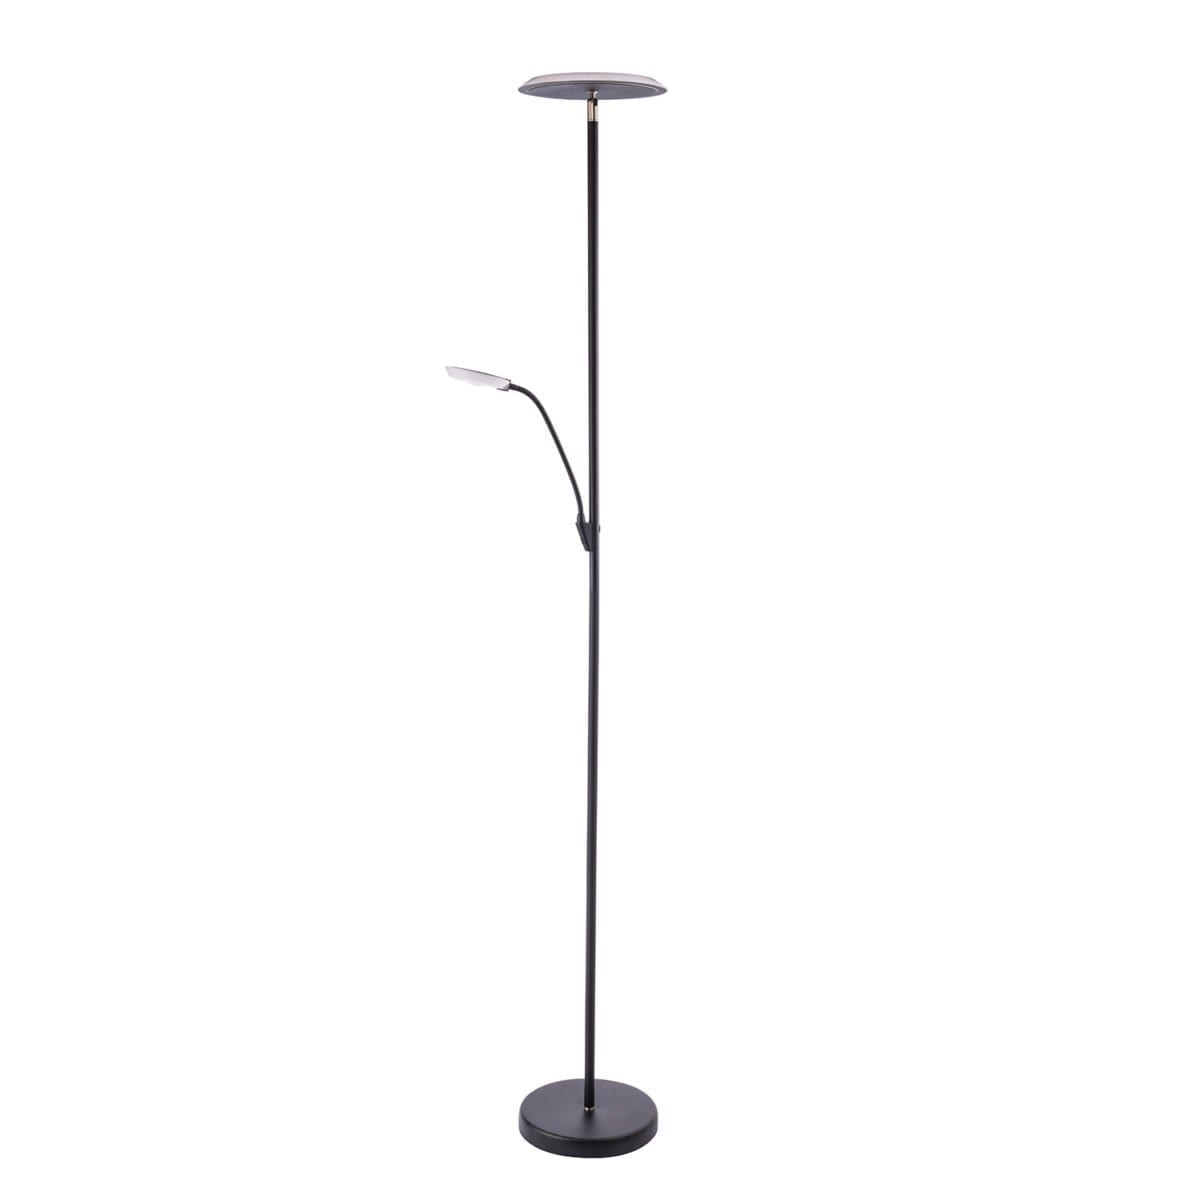 148  TC 5021 BK
LED Torchiere with Reading Light
Available in Black  and Satin Nickle
Regular Price $214.99
Sale Price $149.99